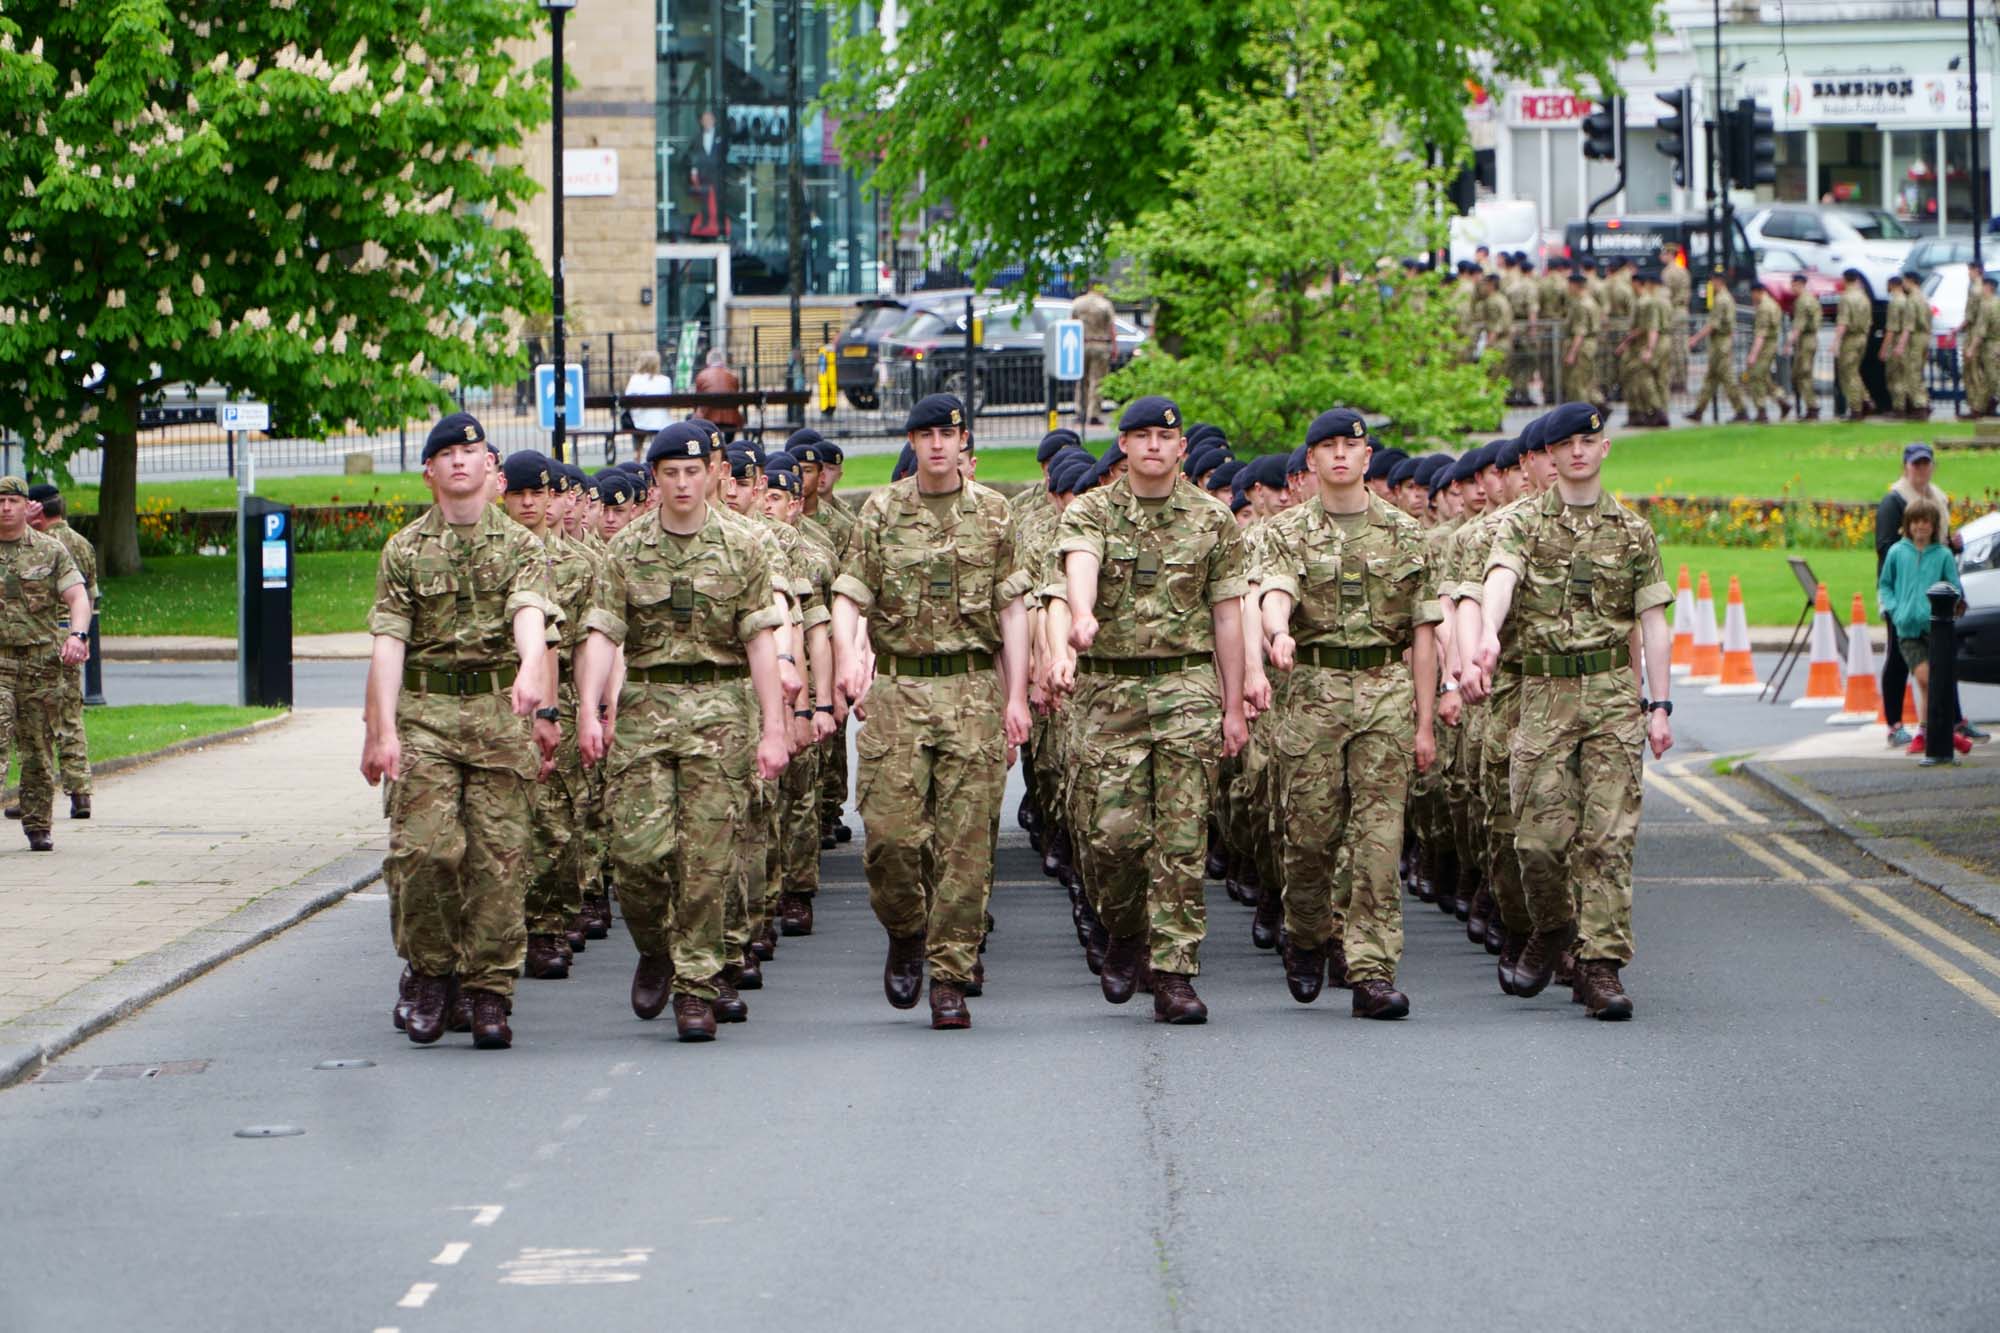 Junior soldiers exercise Freedom of Harrogate